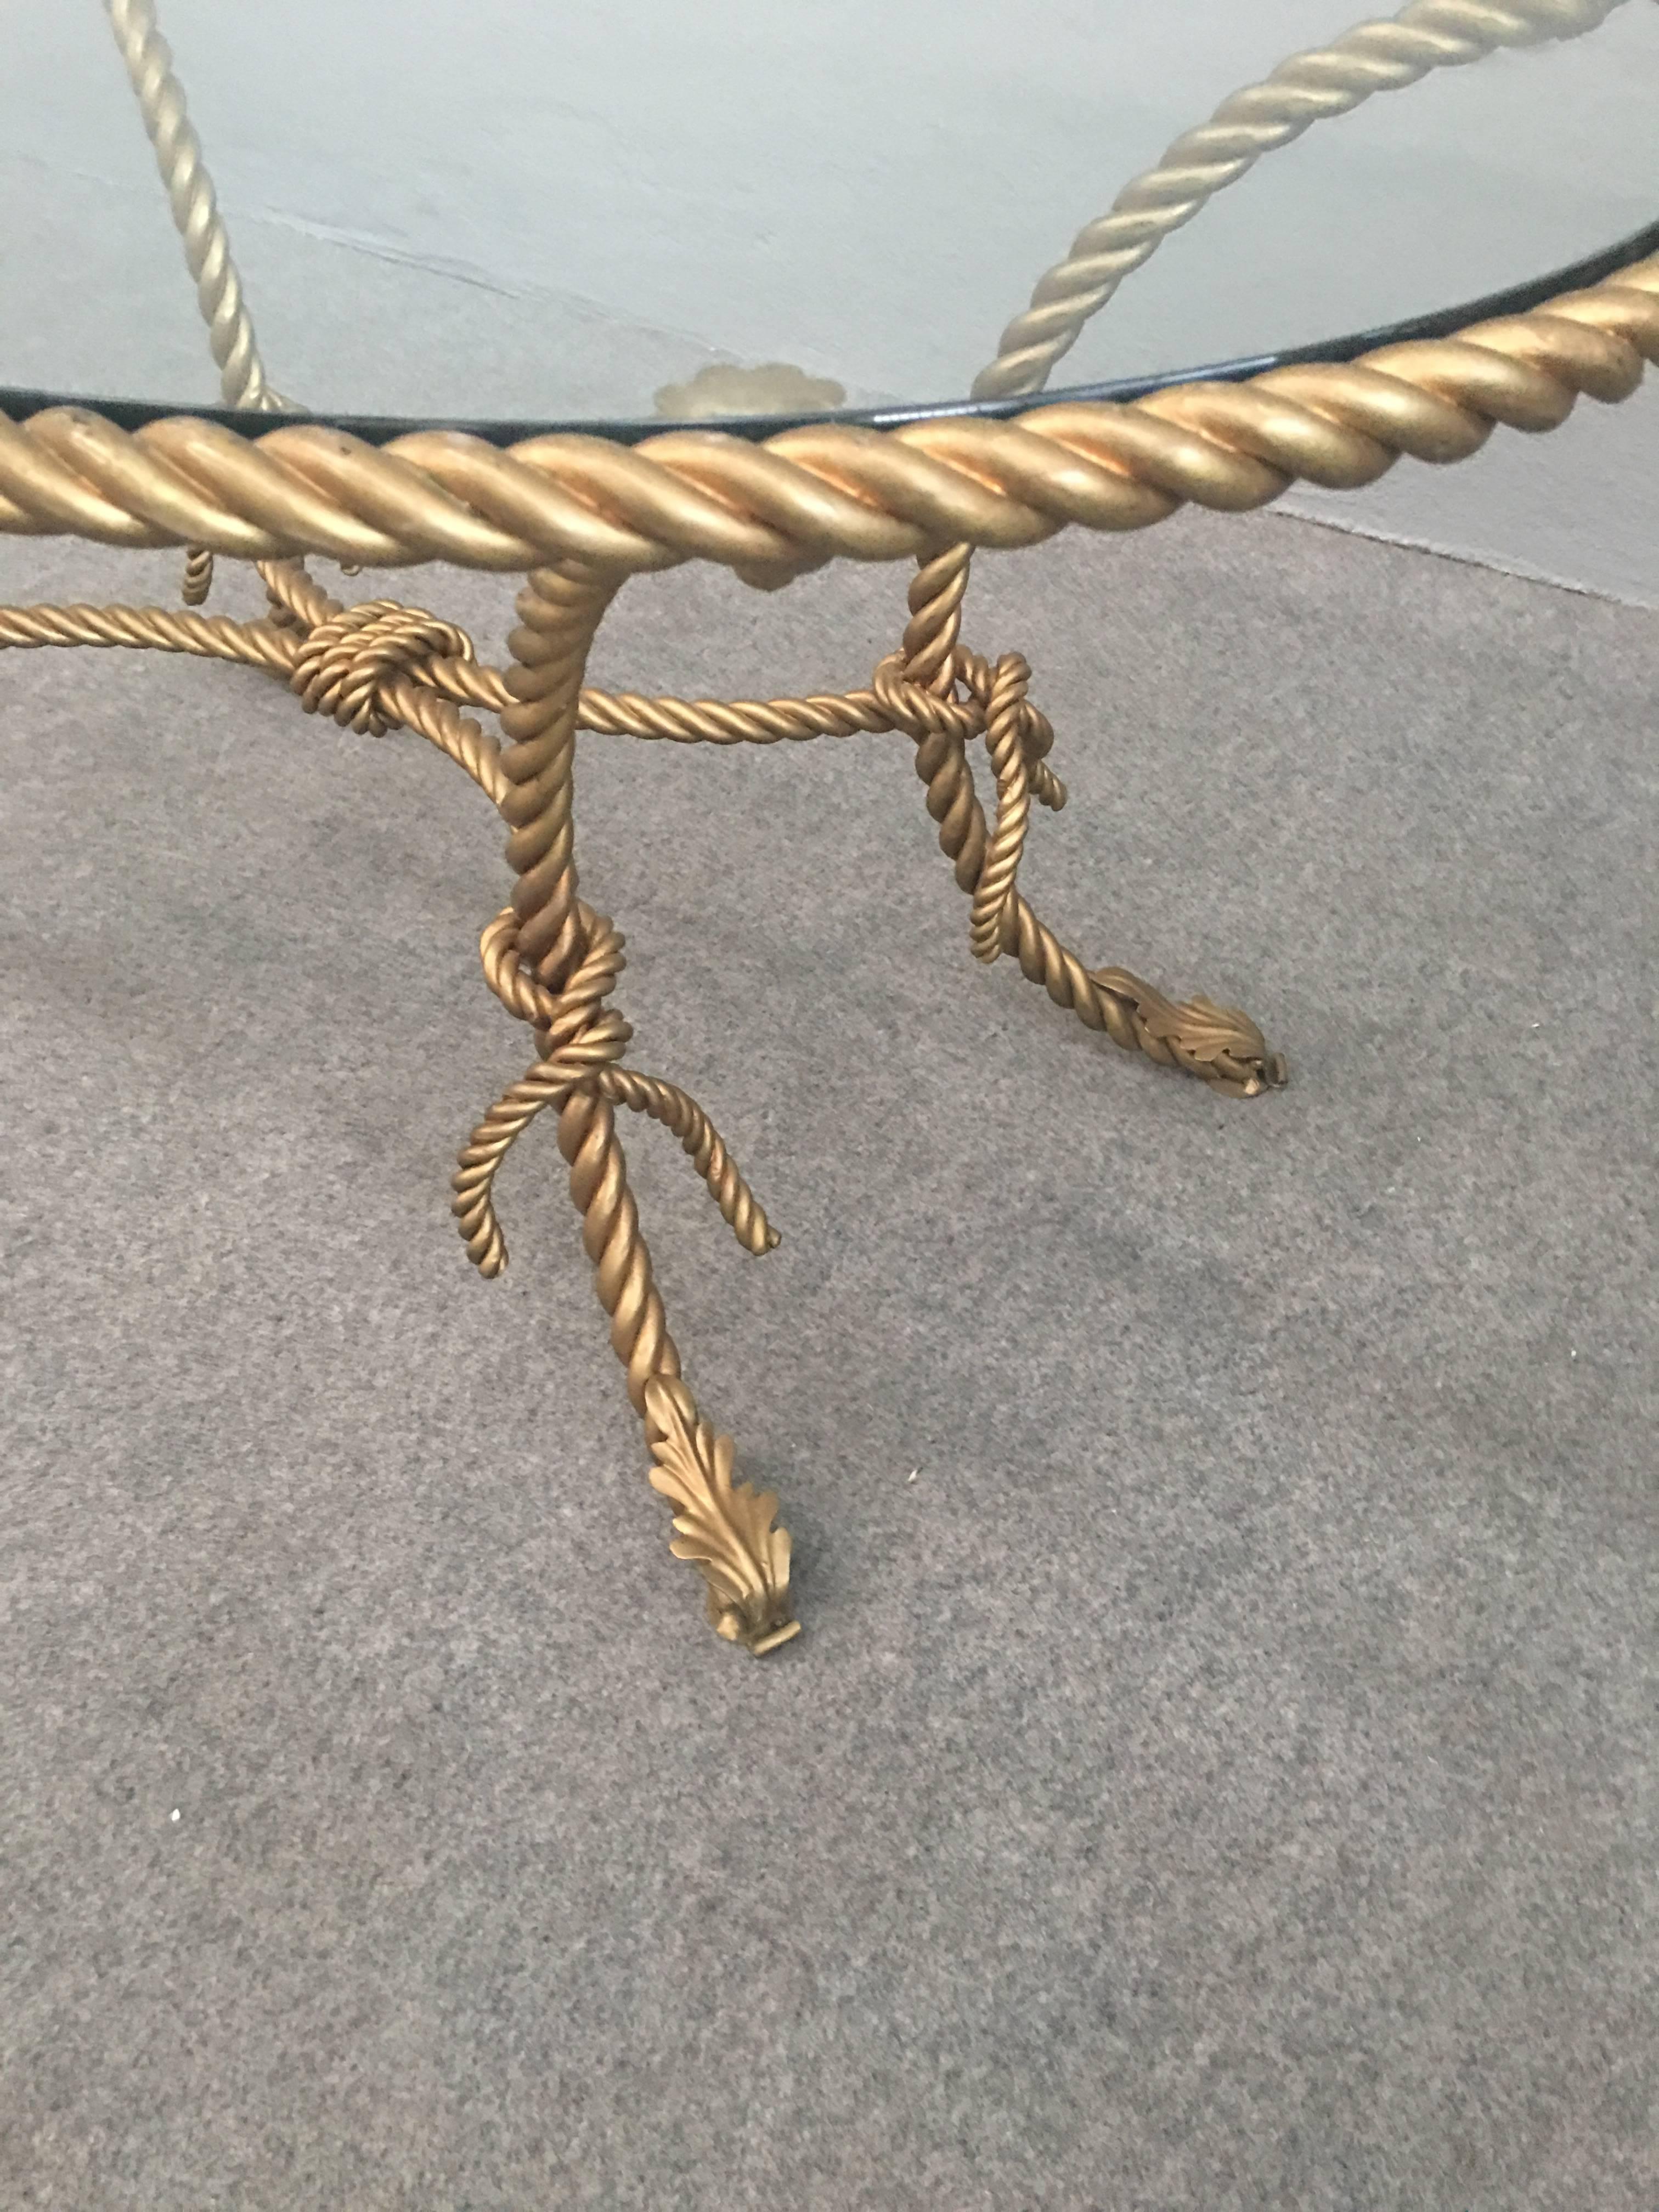 Very elegant and glamorous oval coffee table.
Gilded iron twist with bows base and original glass top.